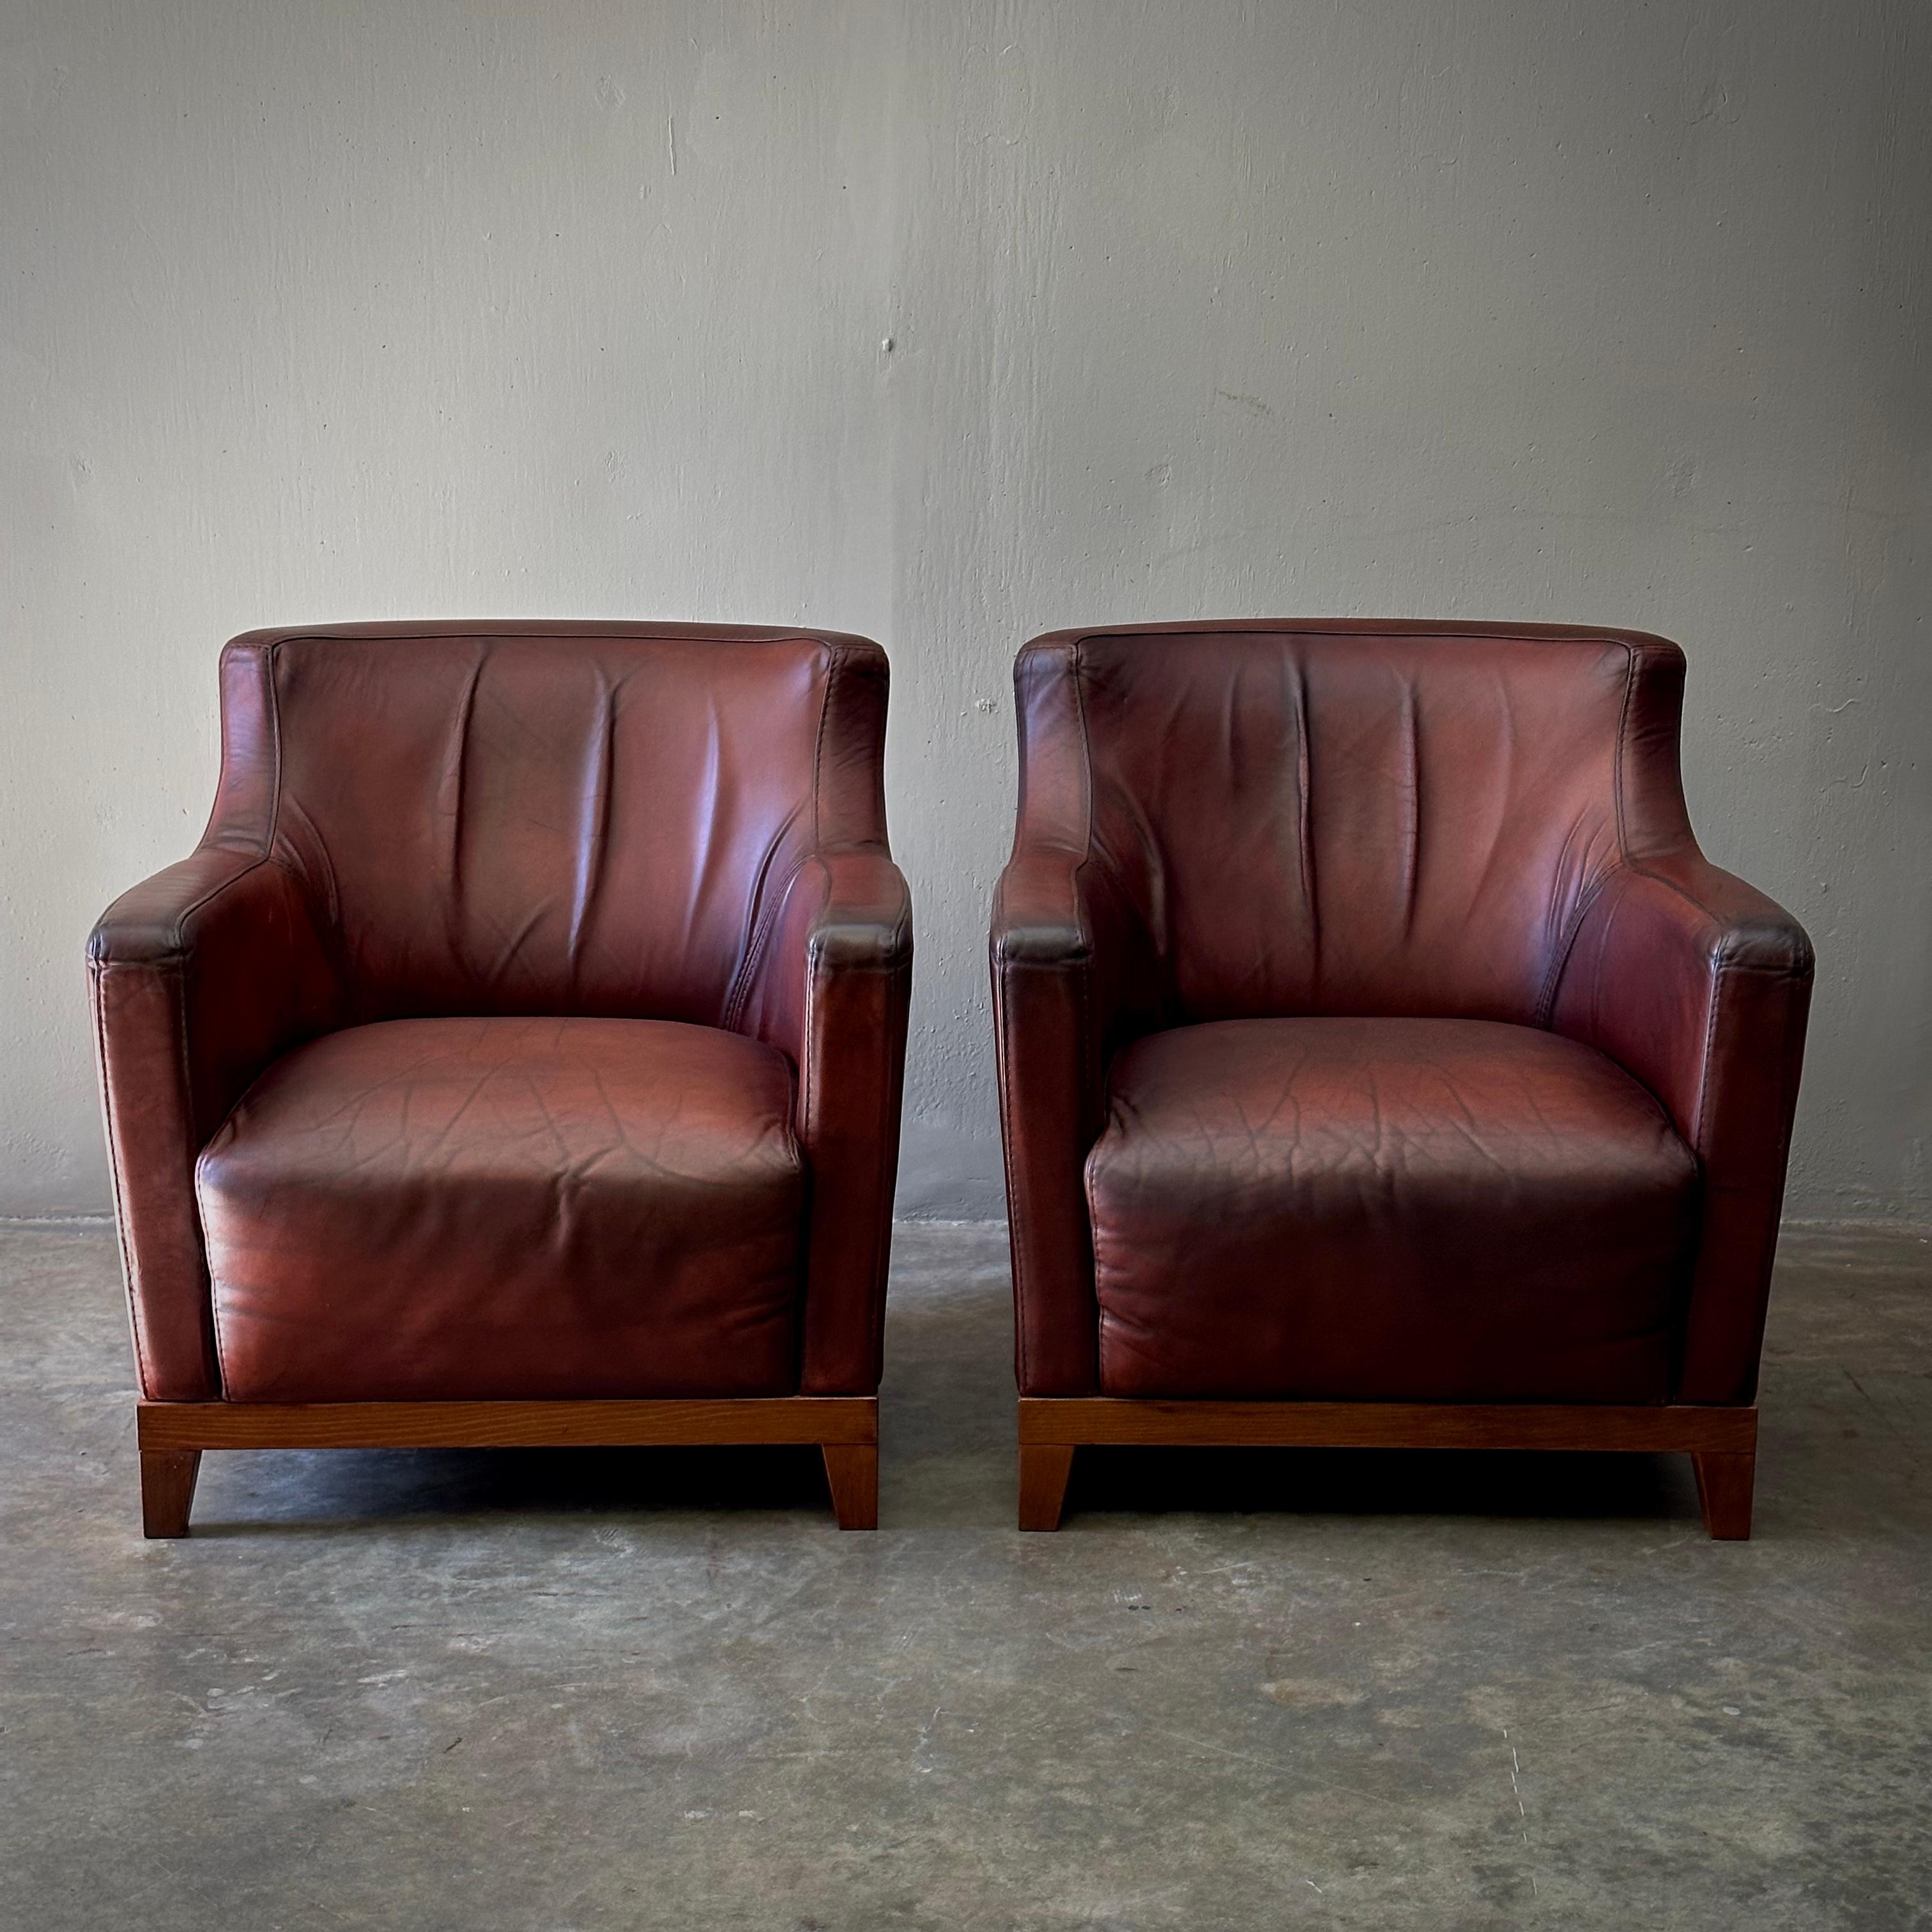 Pair of Dutch upholstered leather club chairs. Classic yet modern with a strong sculptural presence and softly contoured midcentury shape. The patina on the reddish chestnut leather is particularly exquisite. 

Netherlands, circa 1980

Dimensions: